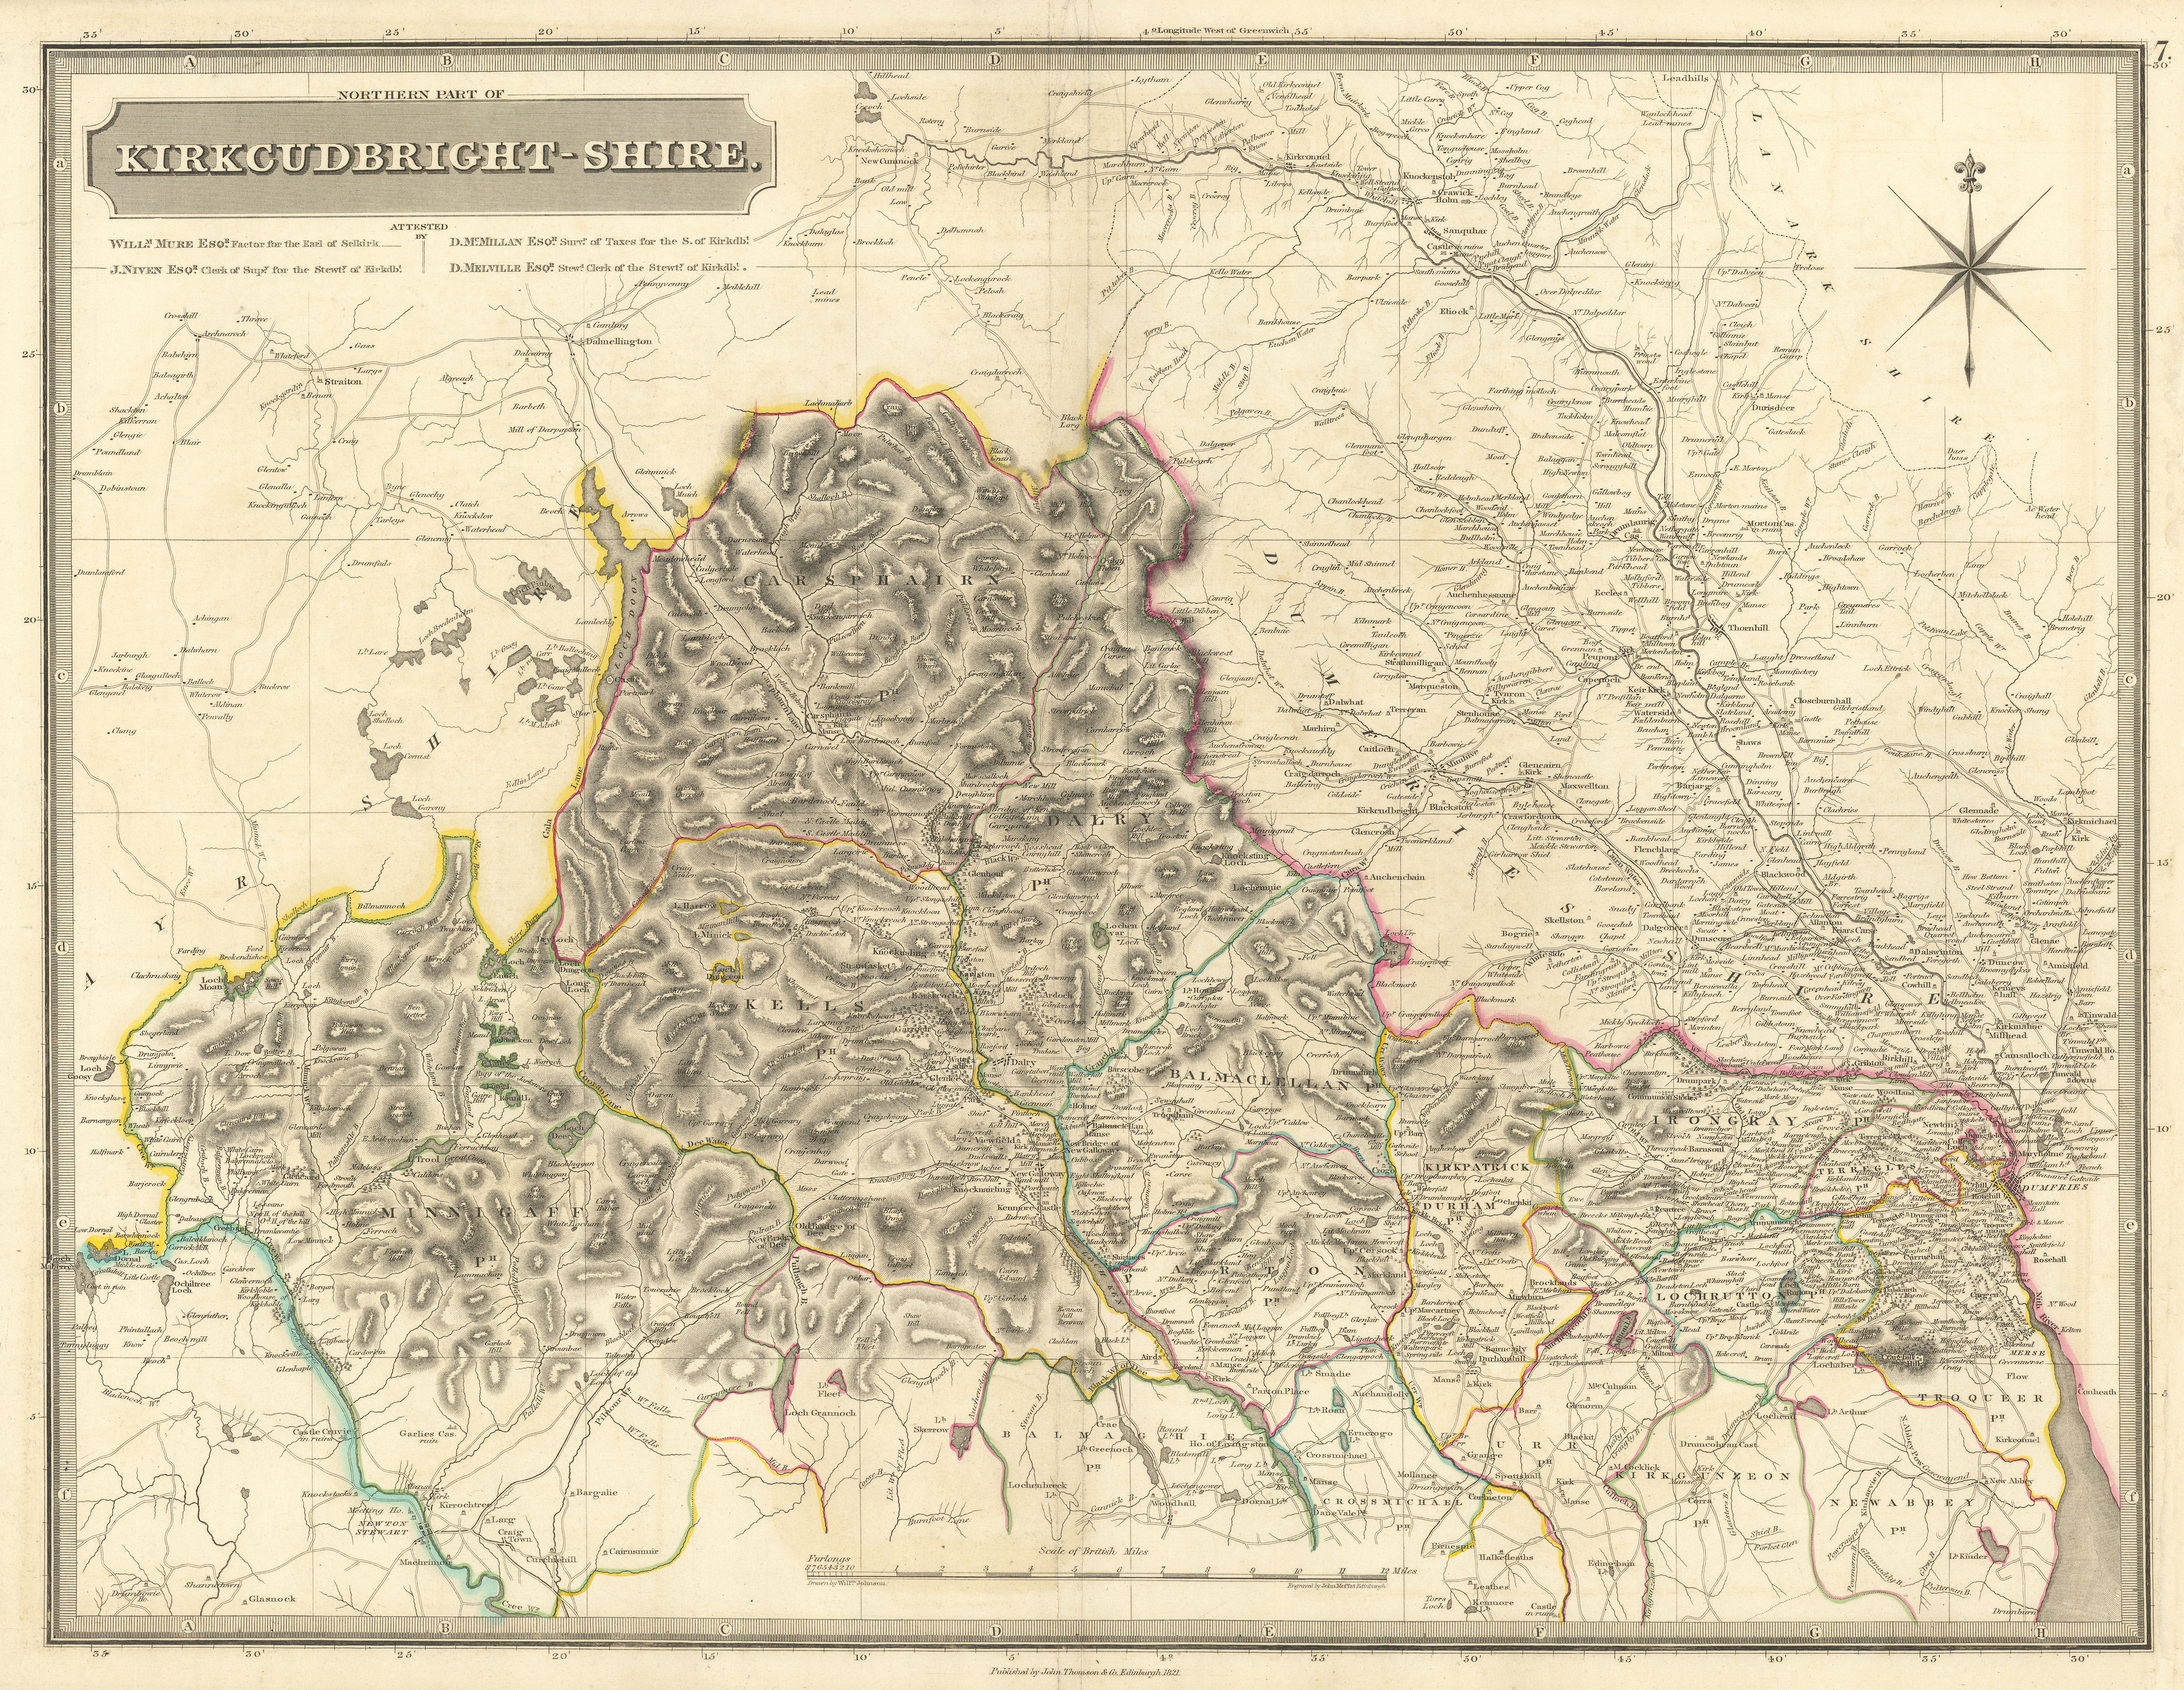 Associate Product Kirkcudbrightshire north. Dumfries Shawhead Sanquhar Thornhill. THOMSON 1832 map